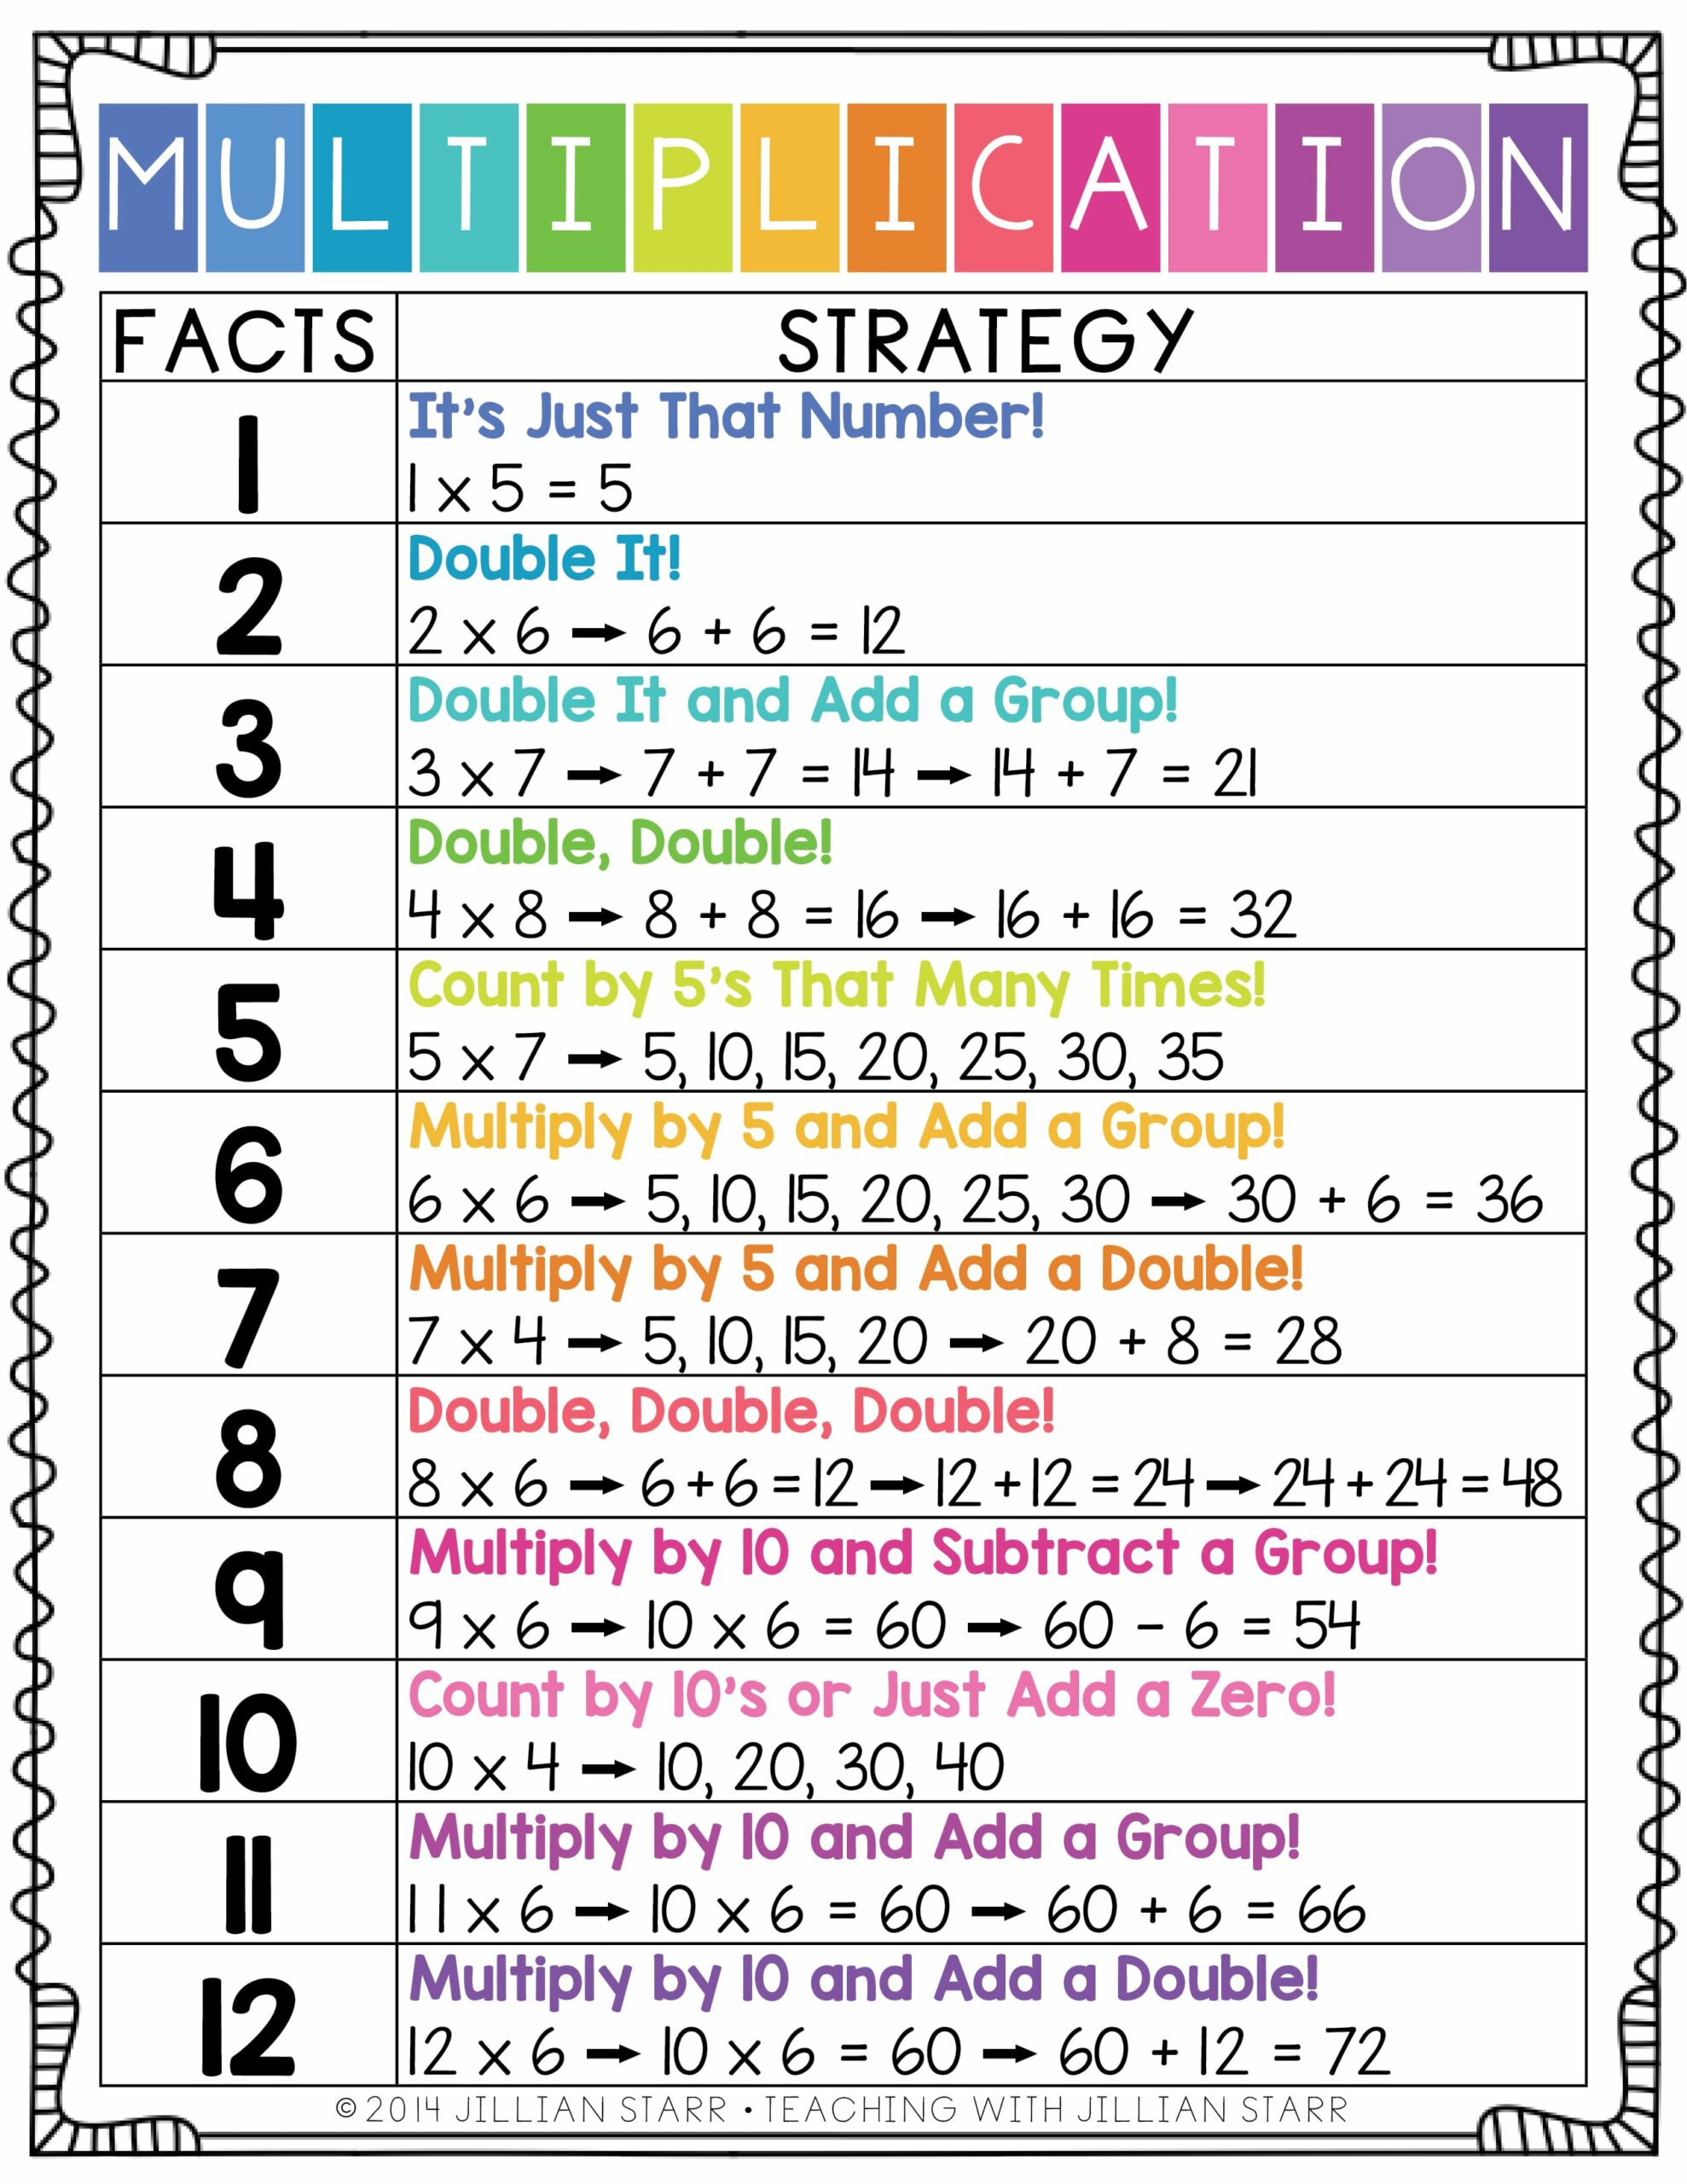 multiplication-strategy-poster-teaching-with-jillian-starr